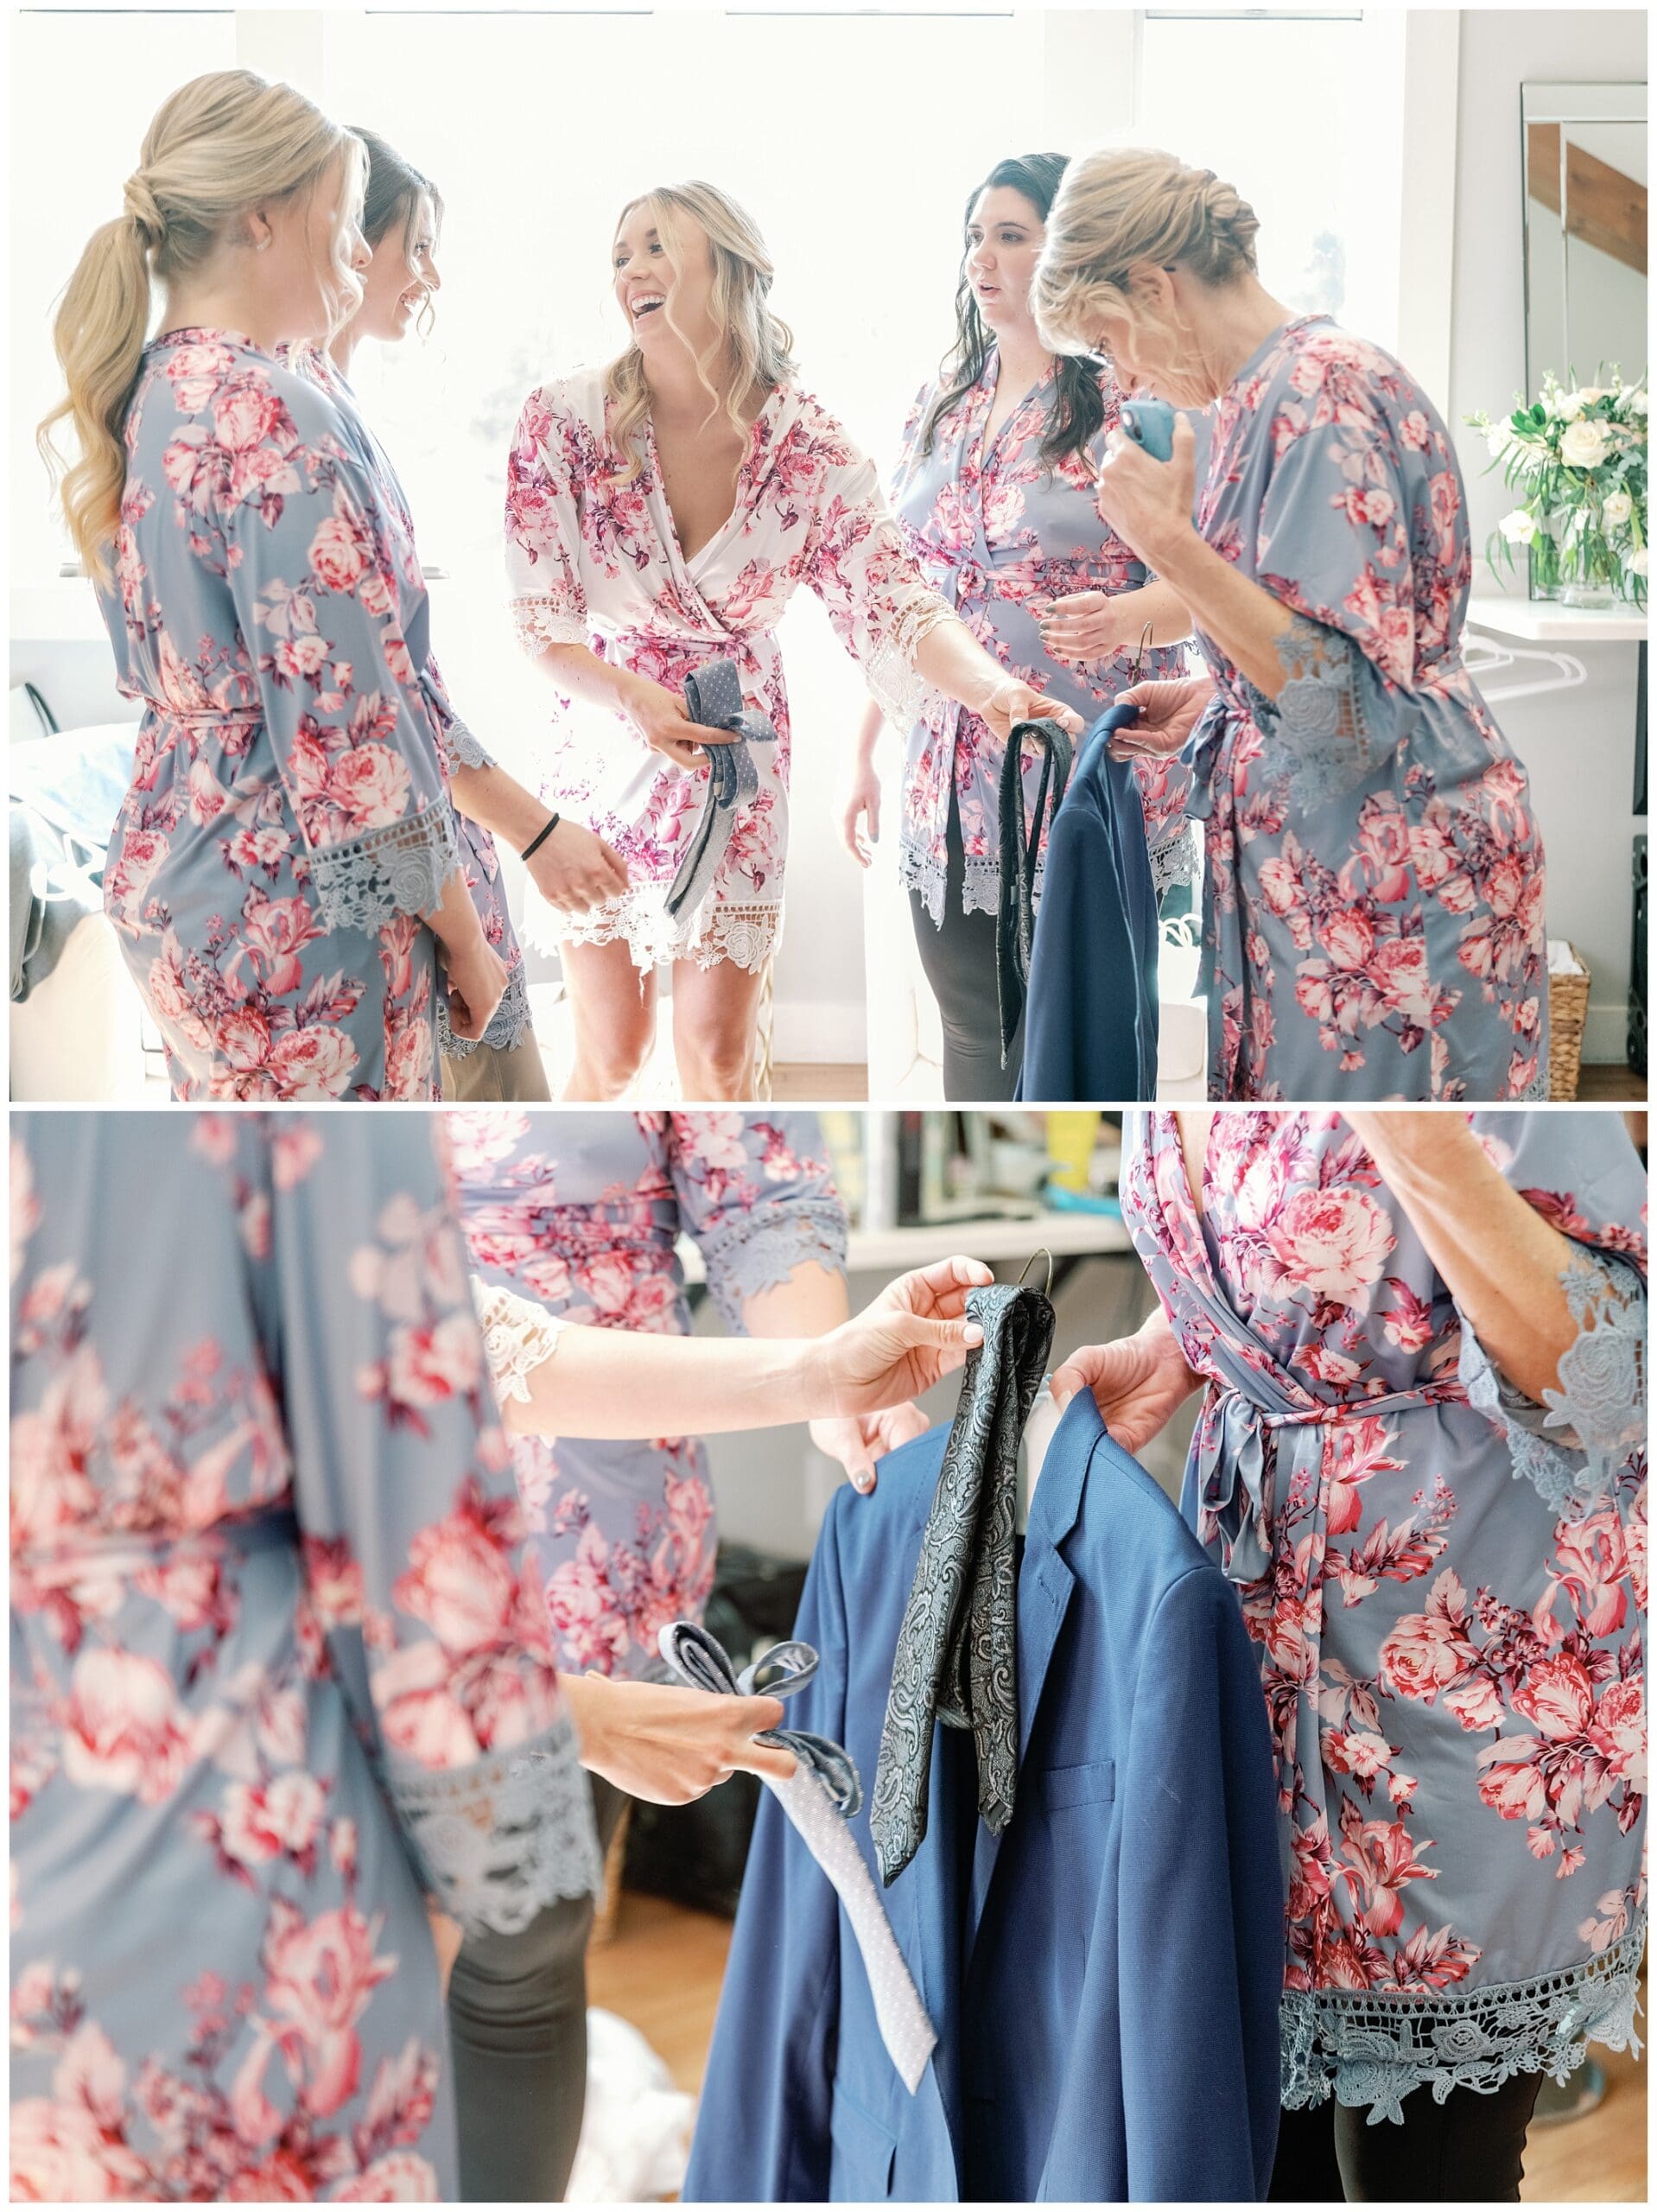 Bridesmaids getting ready in floral robes.